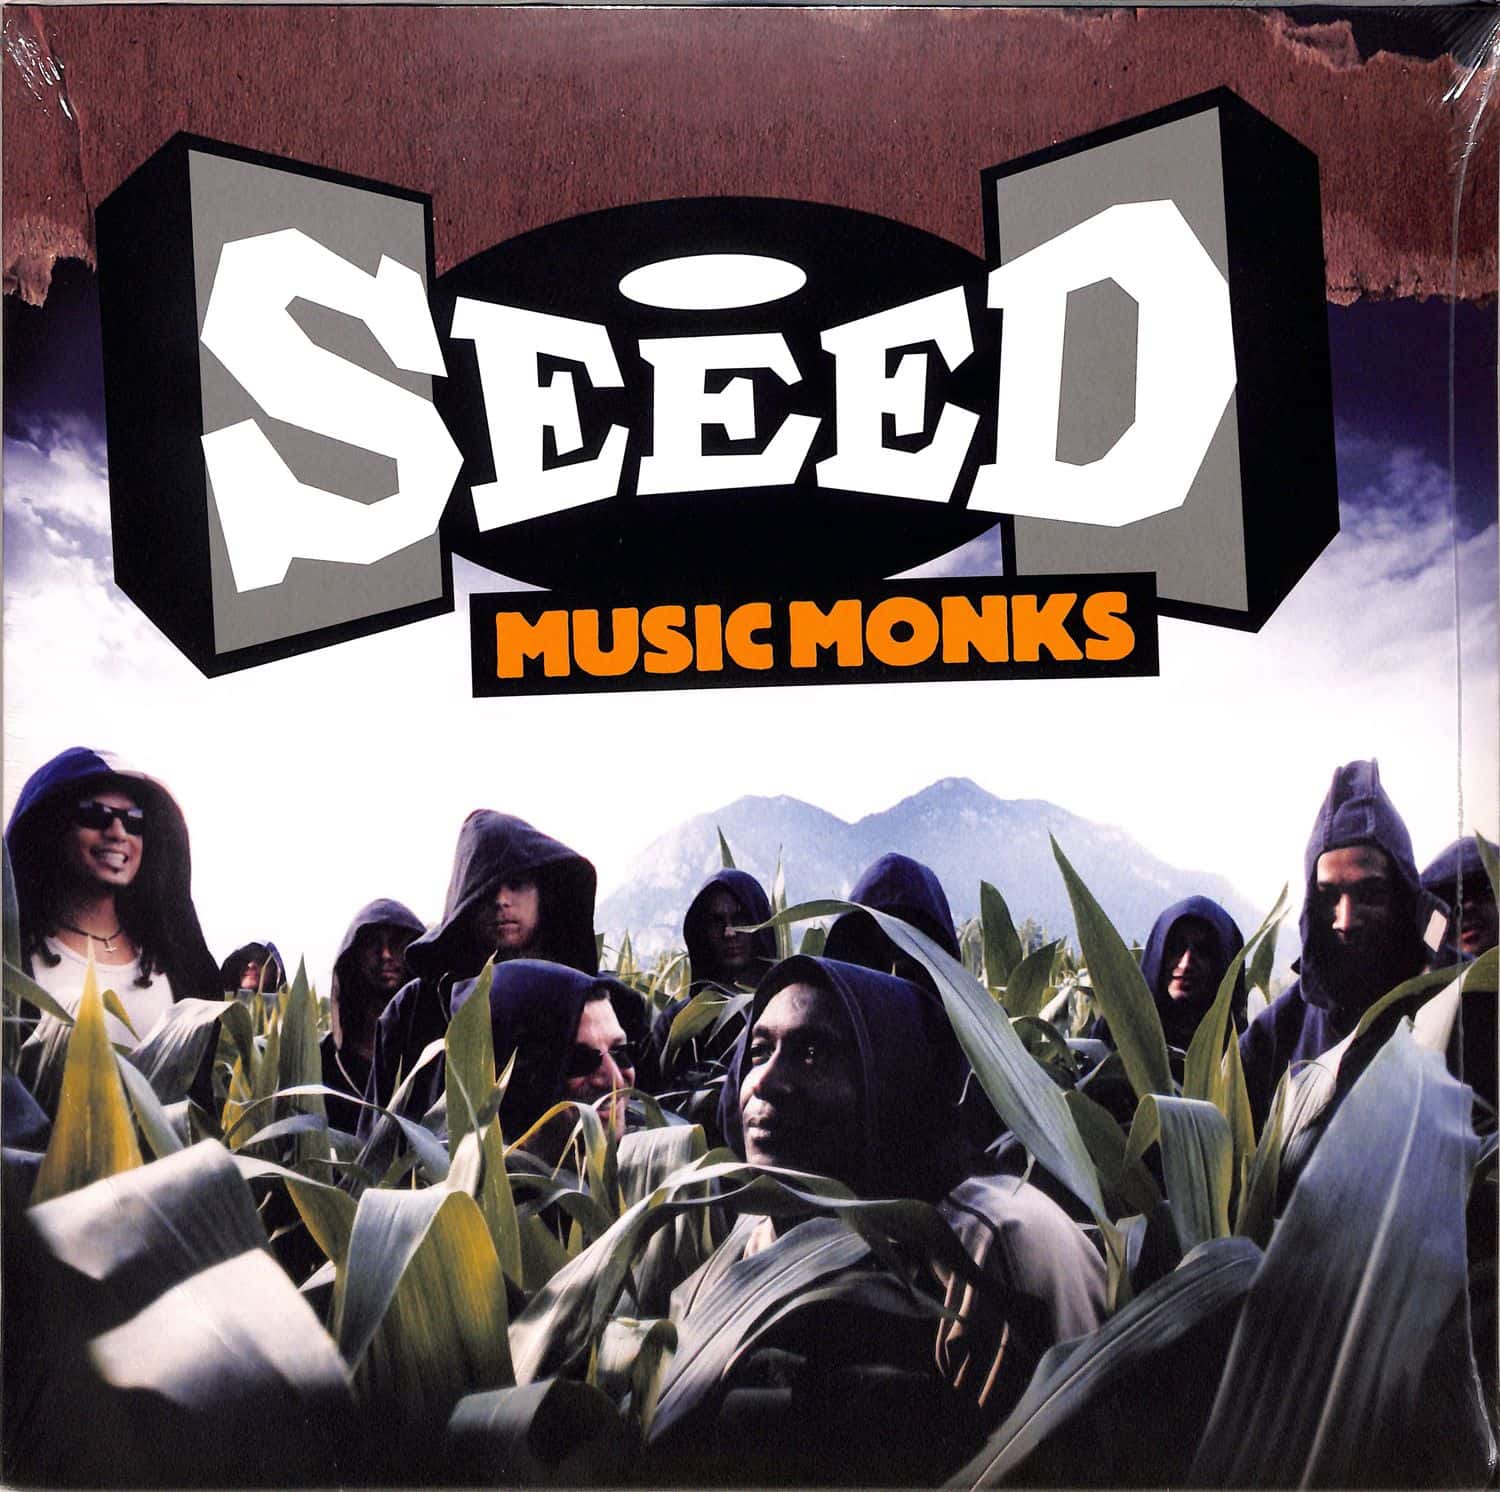 Seeed - MUSIC MONKS 